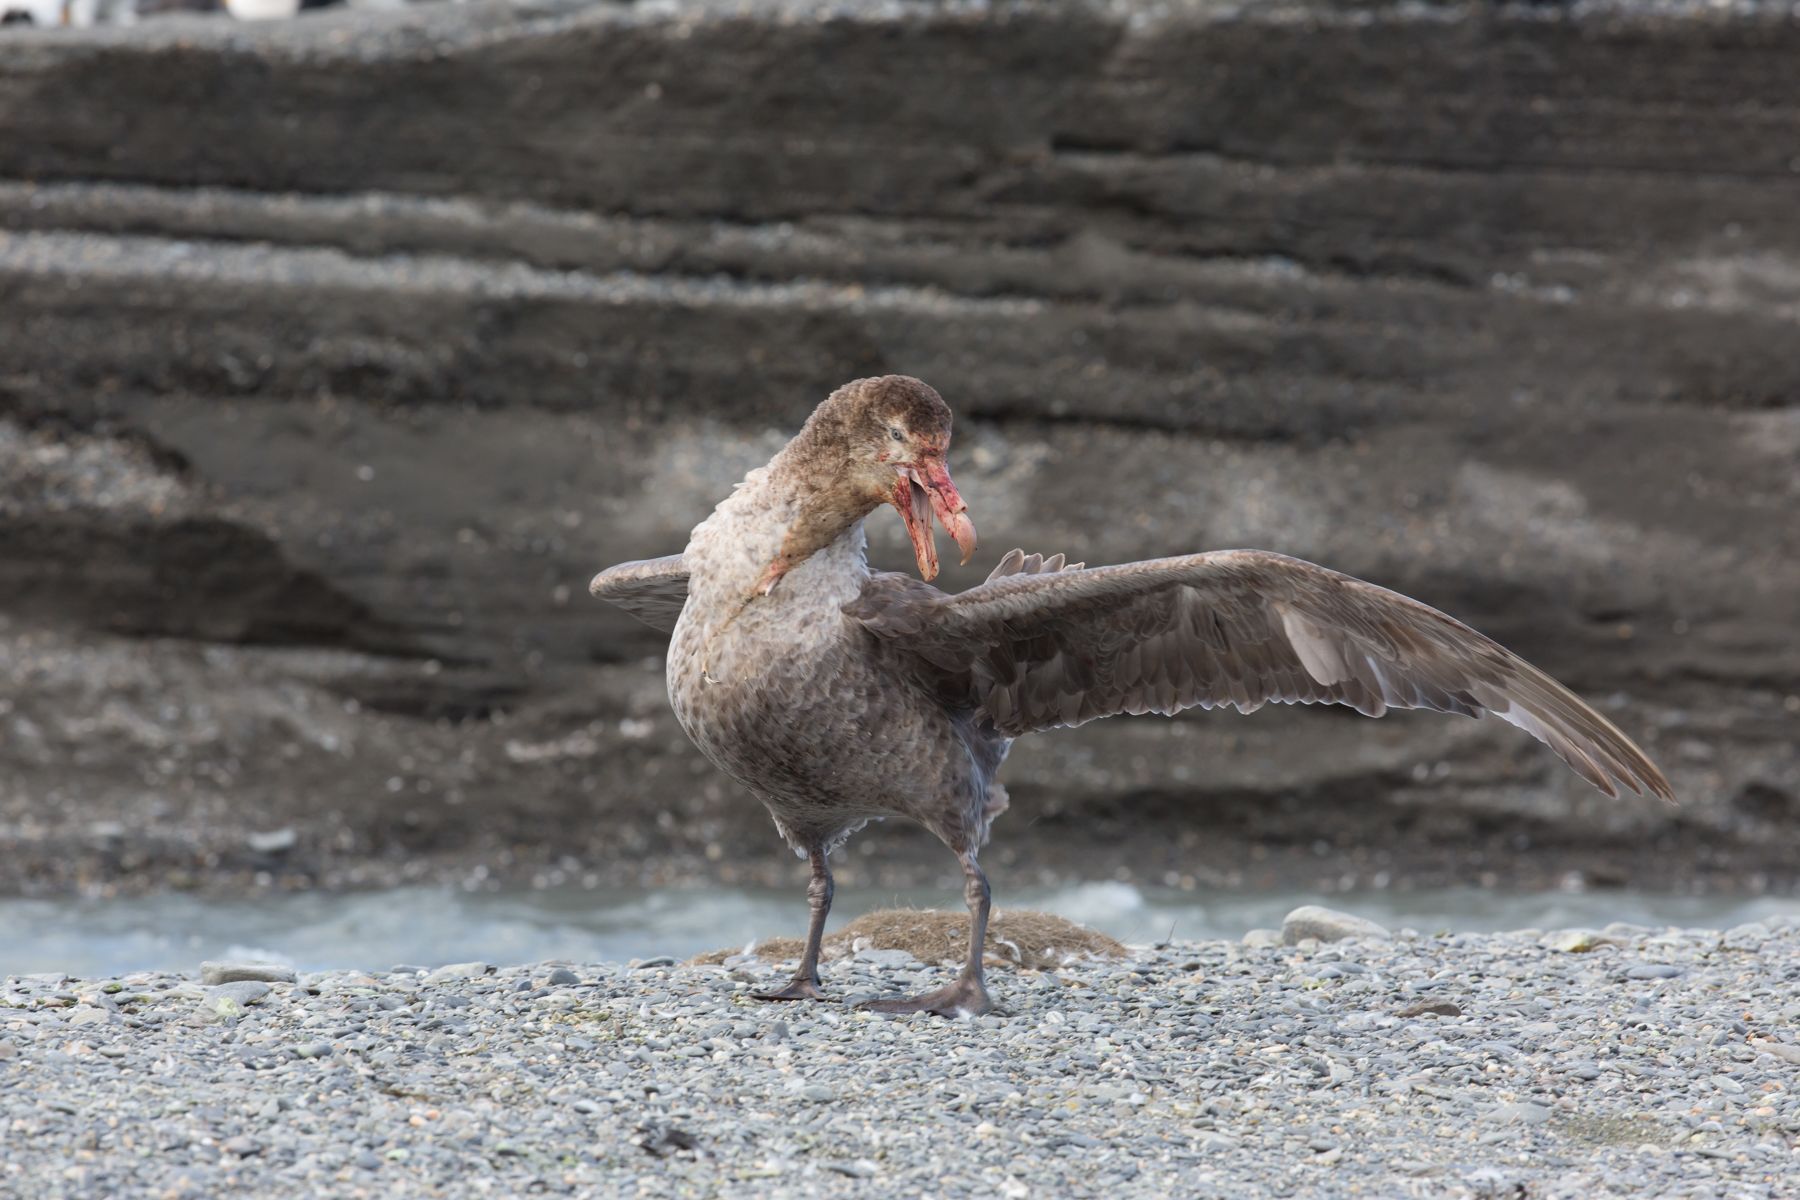 A threat-posturing Southern Giant Petrel